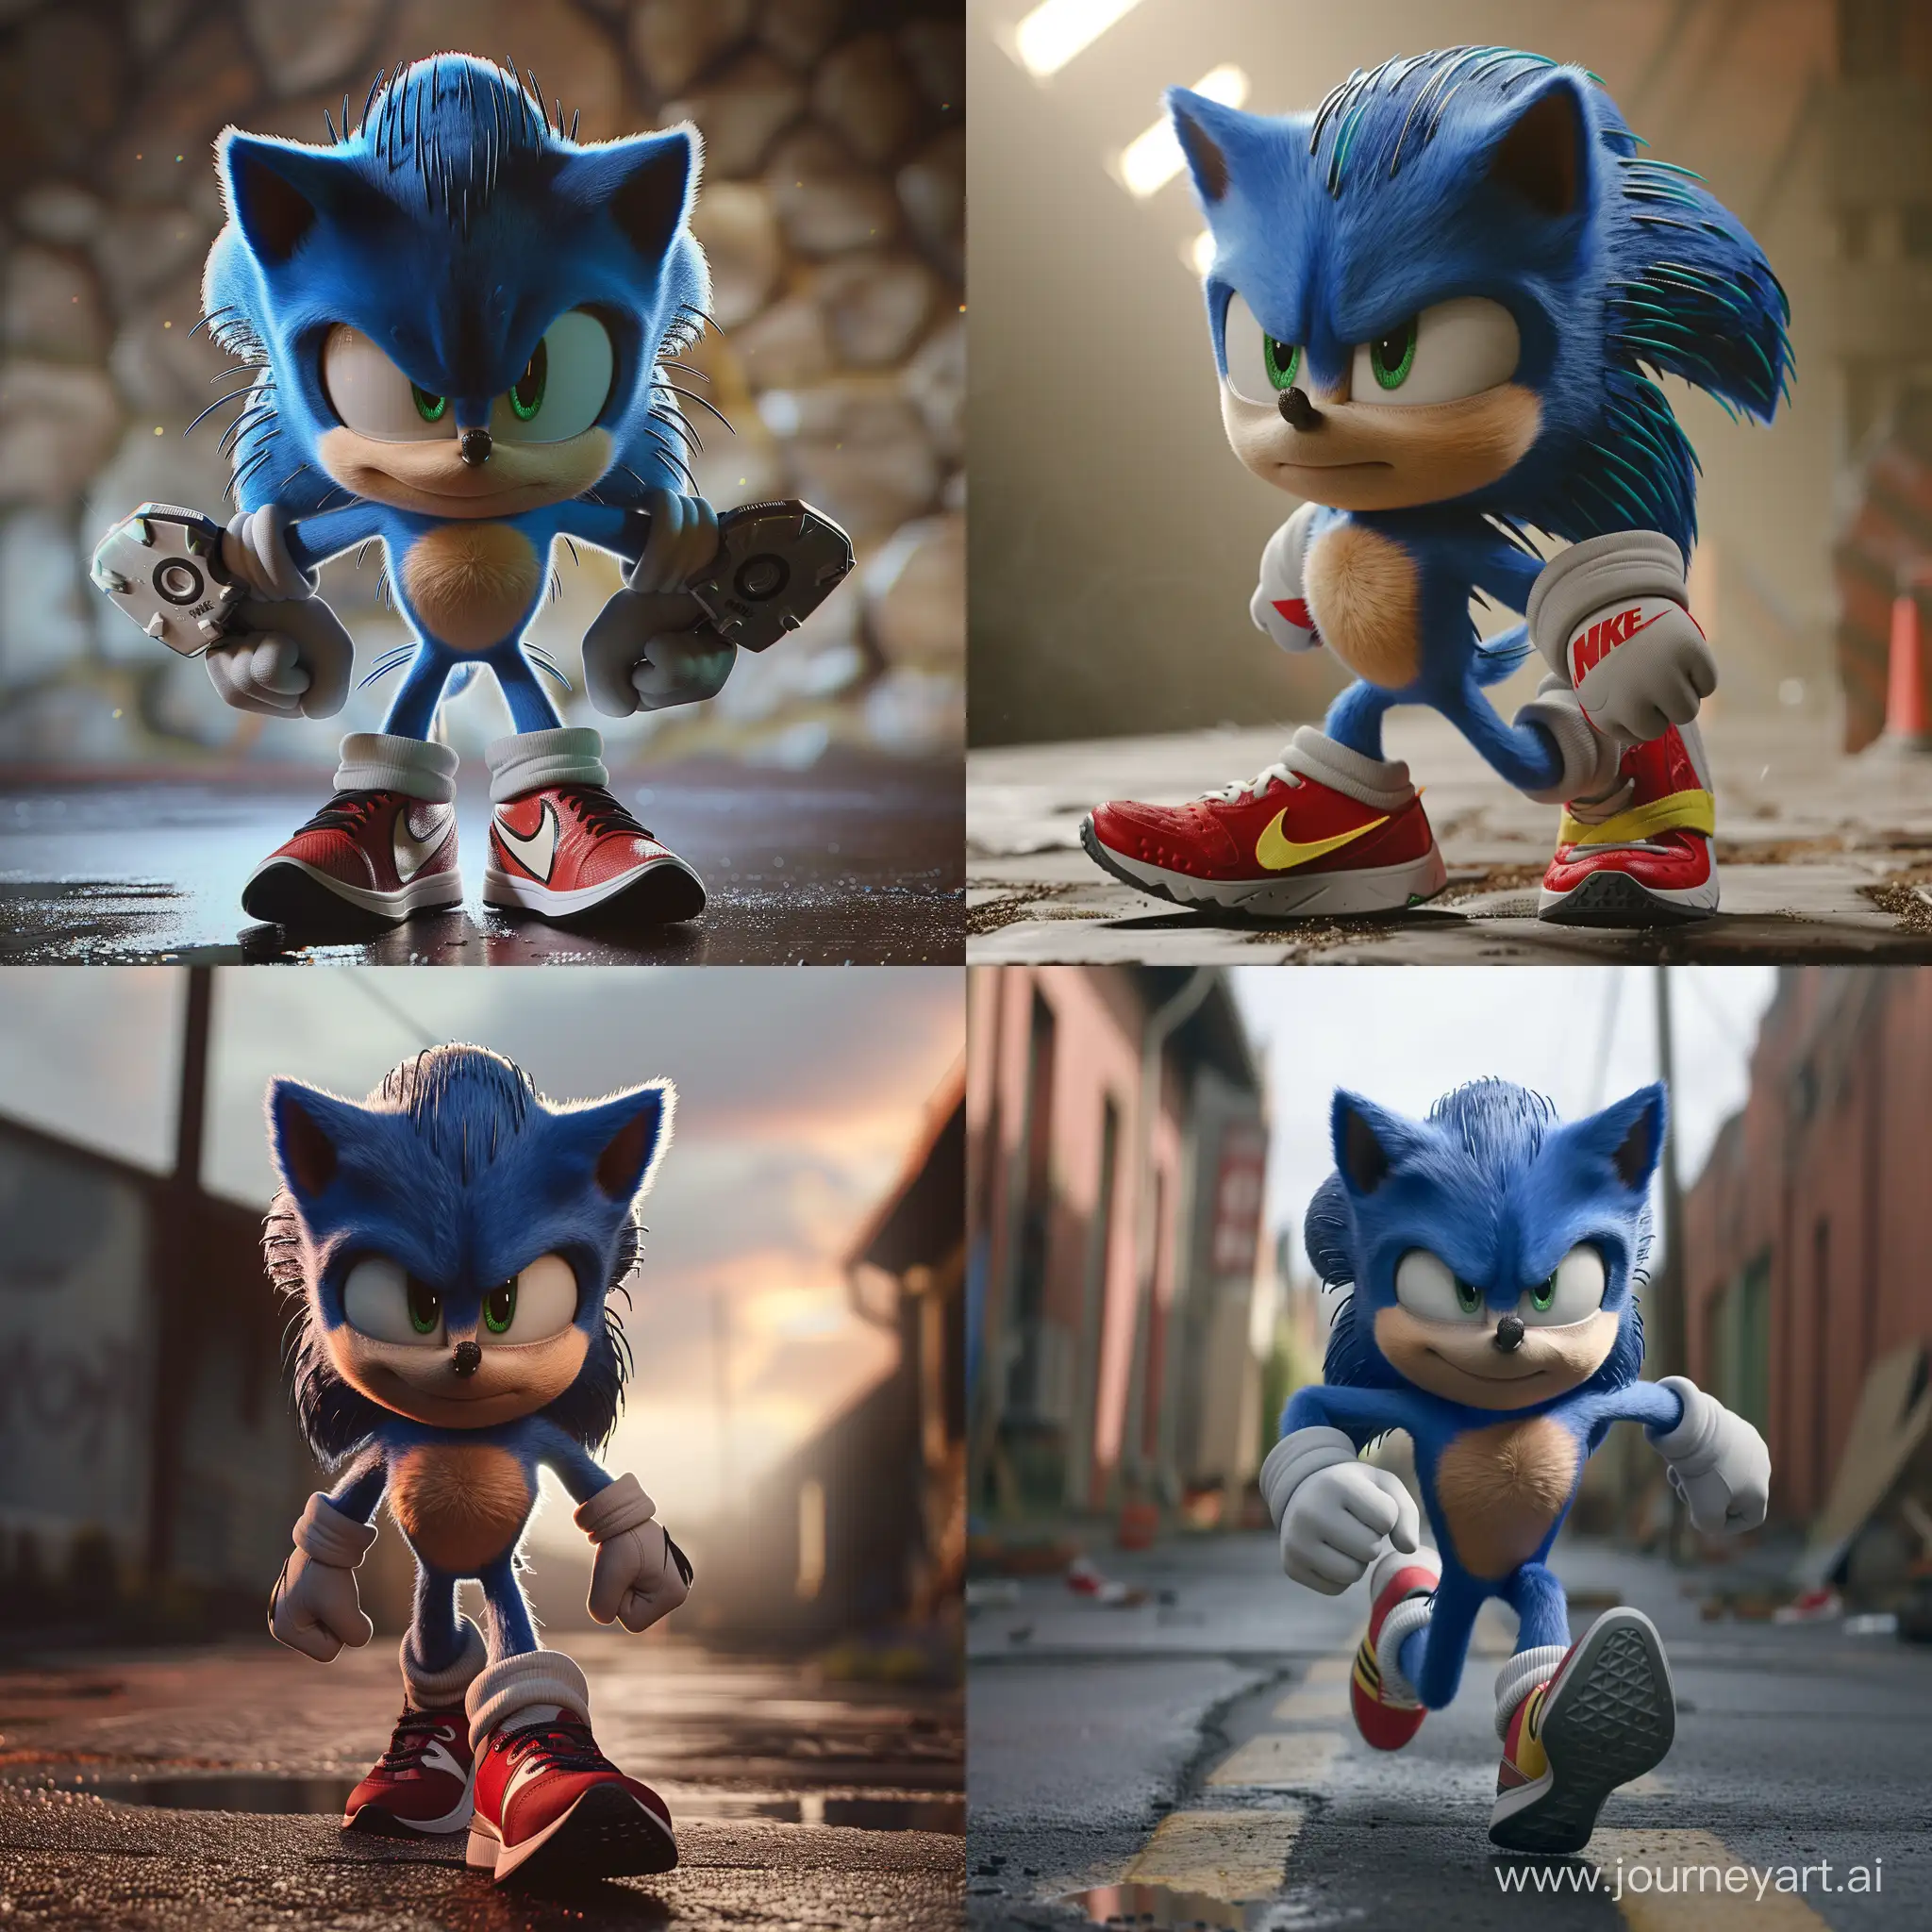 Shadow-the-Hedgehog-Movie-Character-Wearing-Nike-Shoes